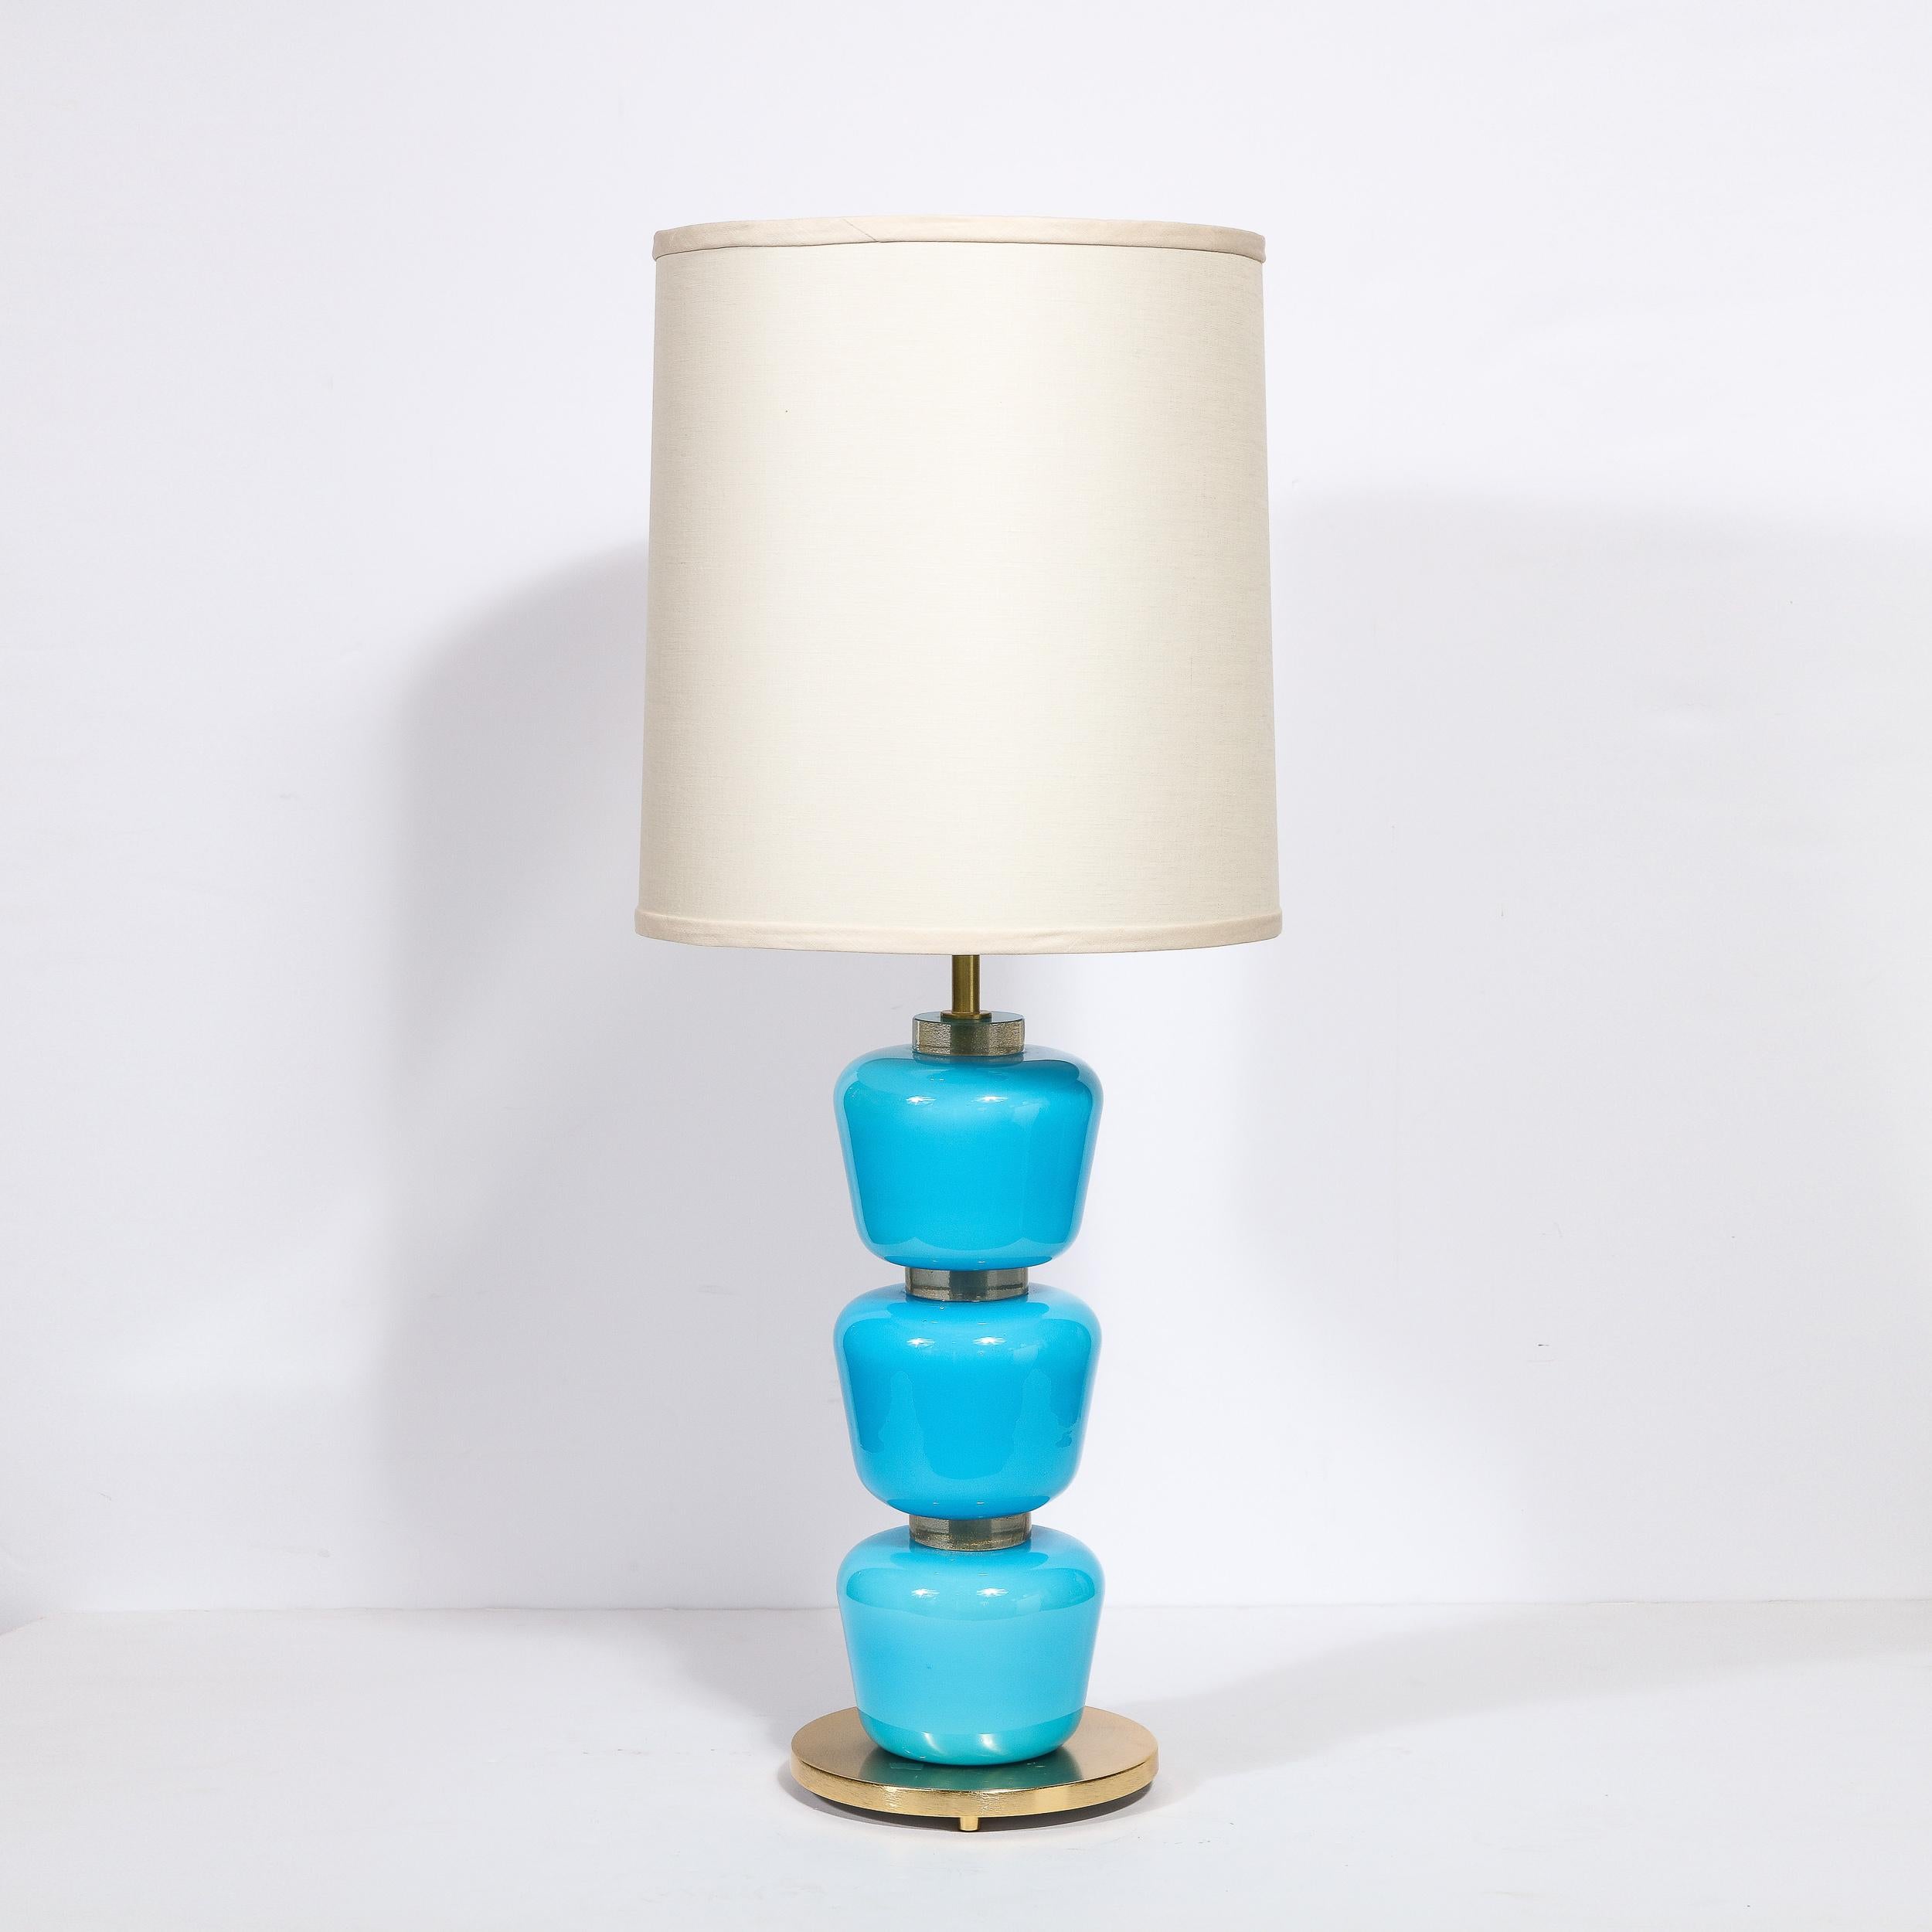 Italian Modernist Hand-Blown Murano Glass Table Lamps in Cyan Blue with 24K Gold Flecks For Sale